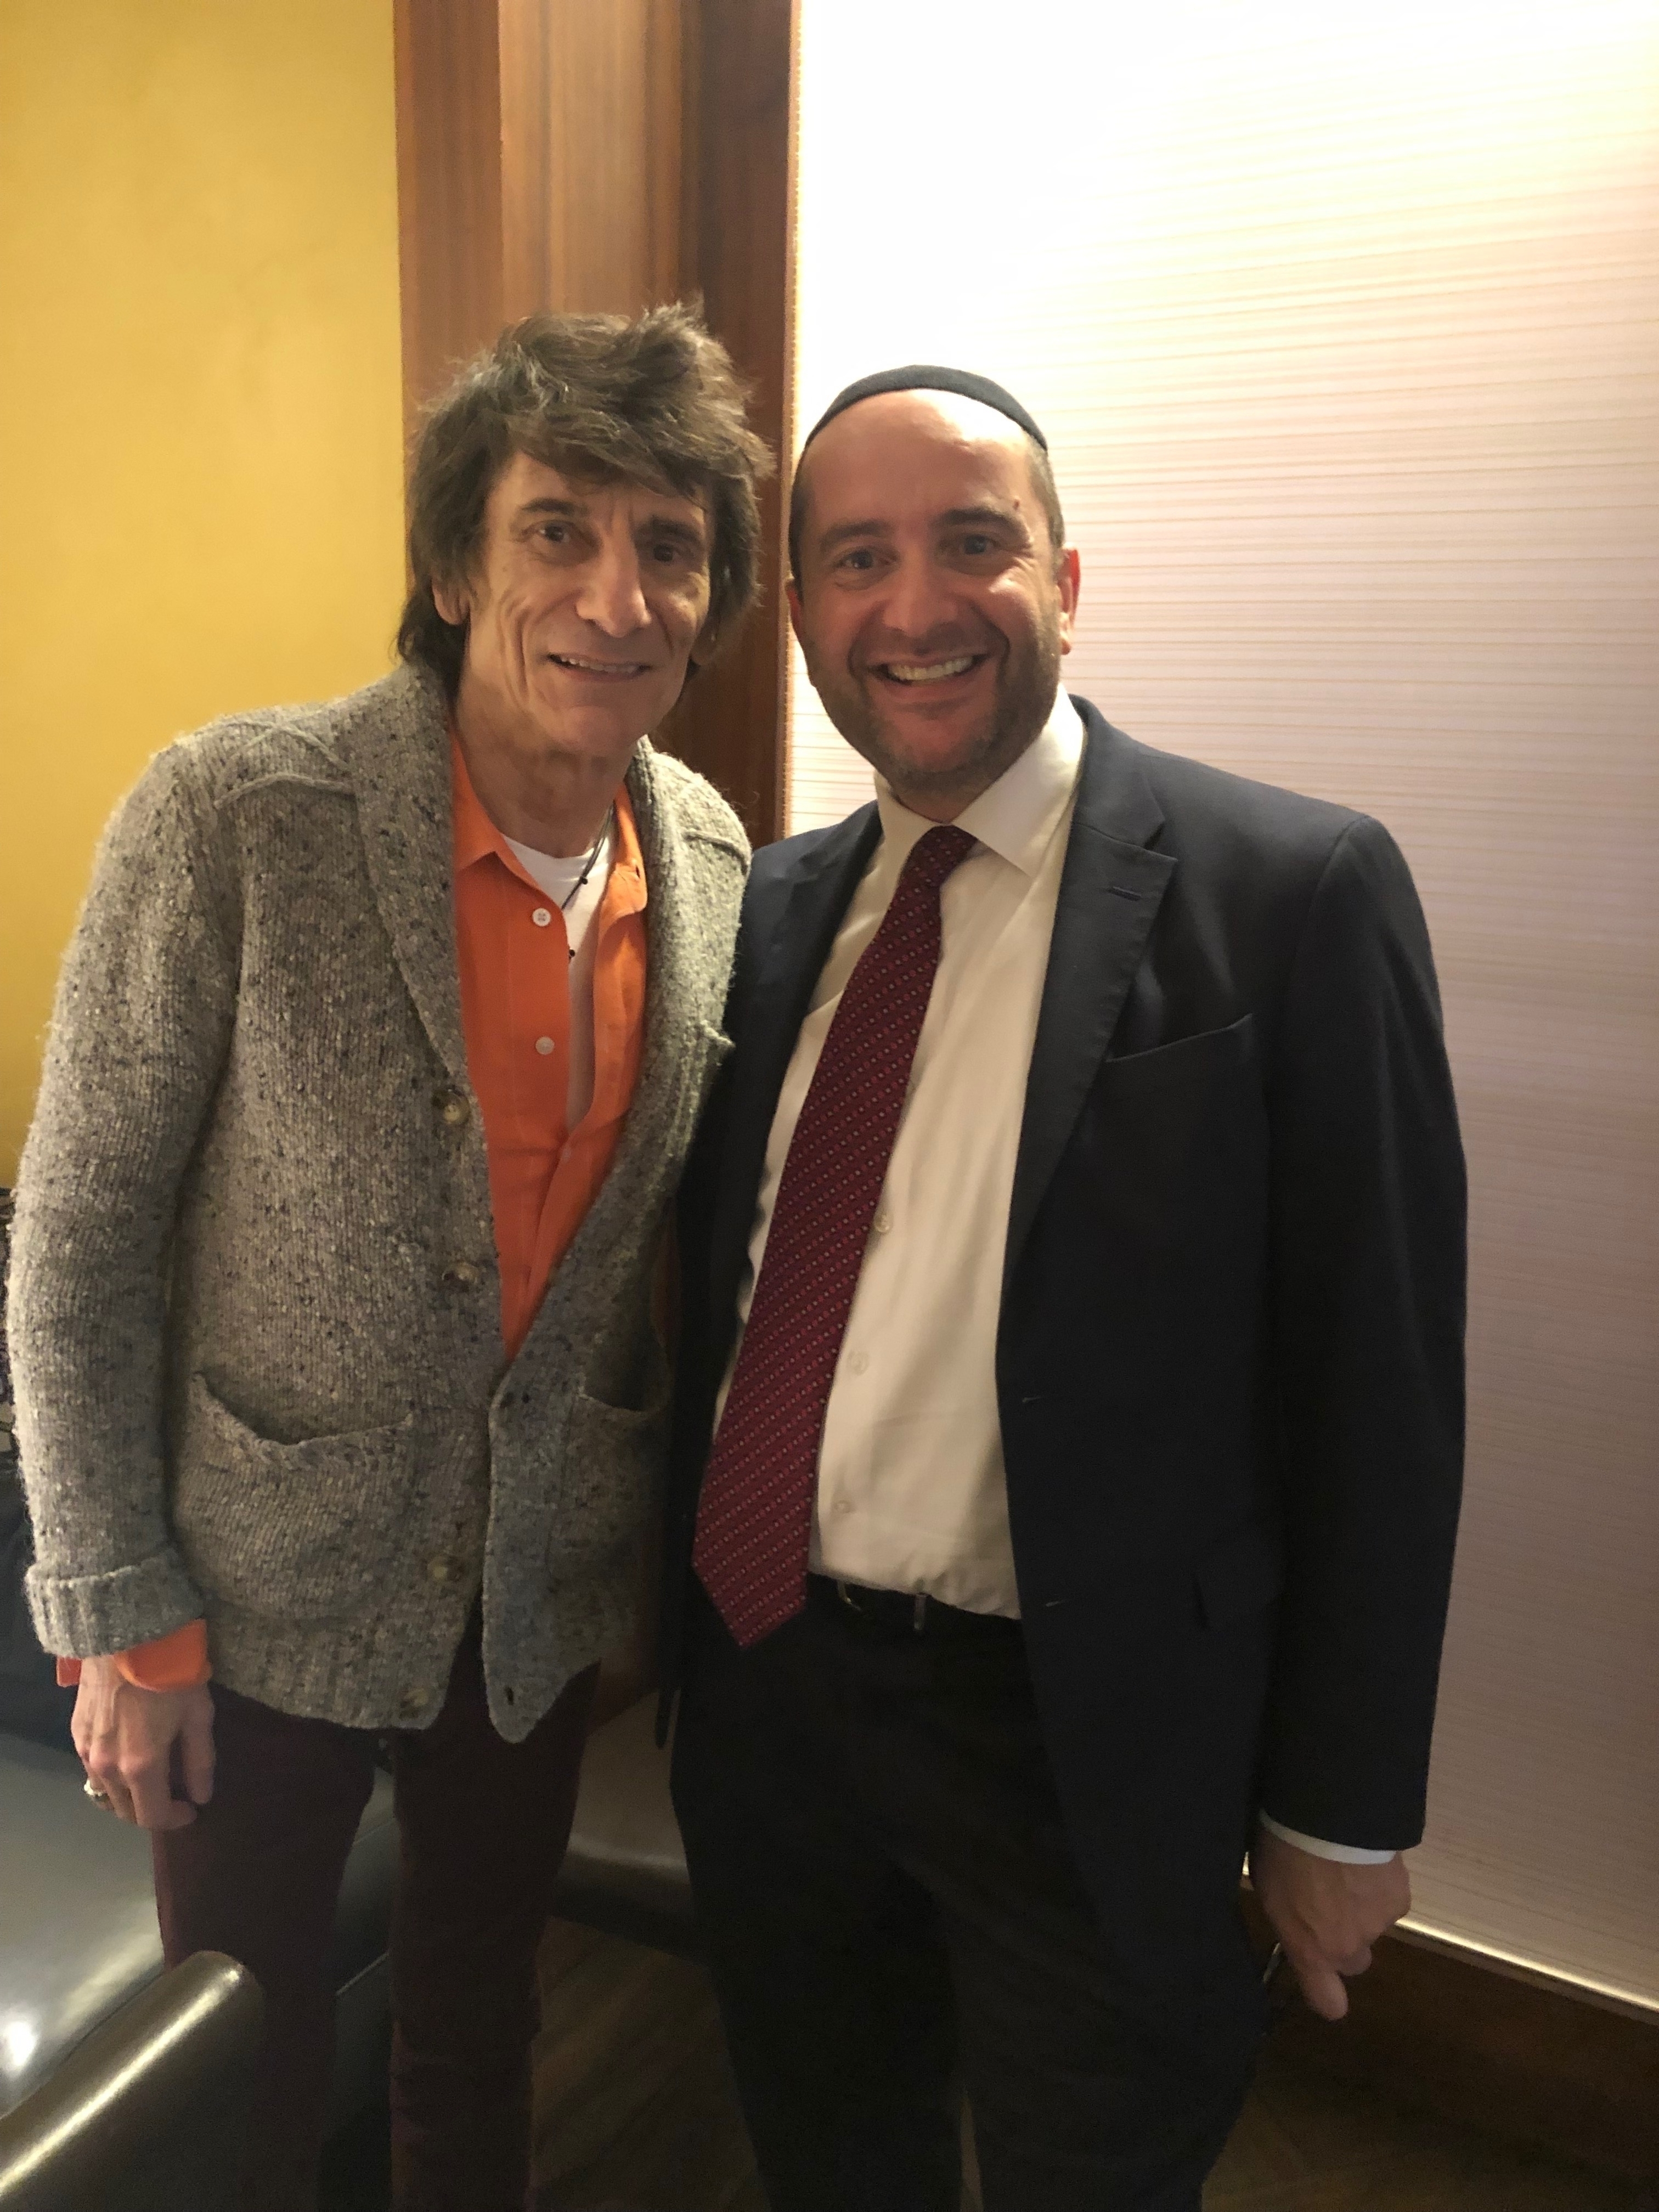 Rabbi Dunner with Ronnie Wood of the Rolling Stones